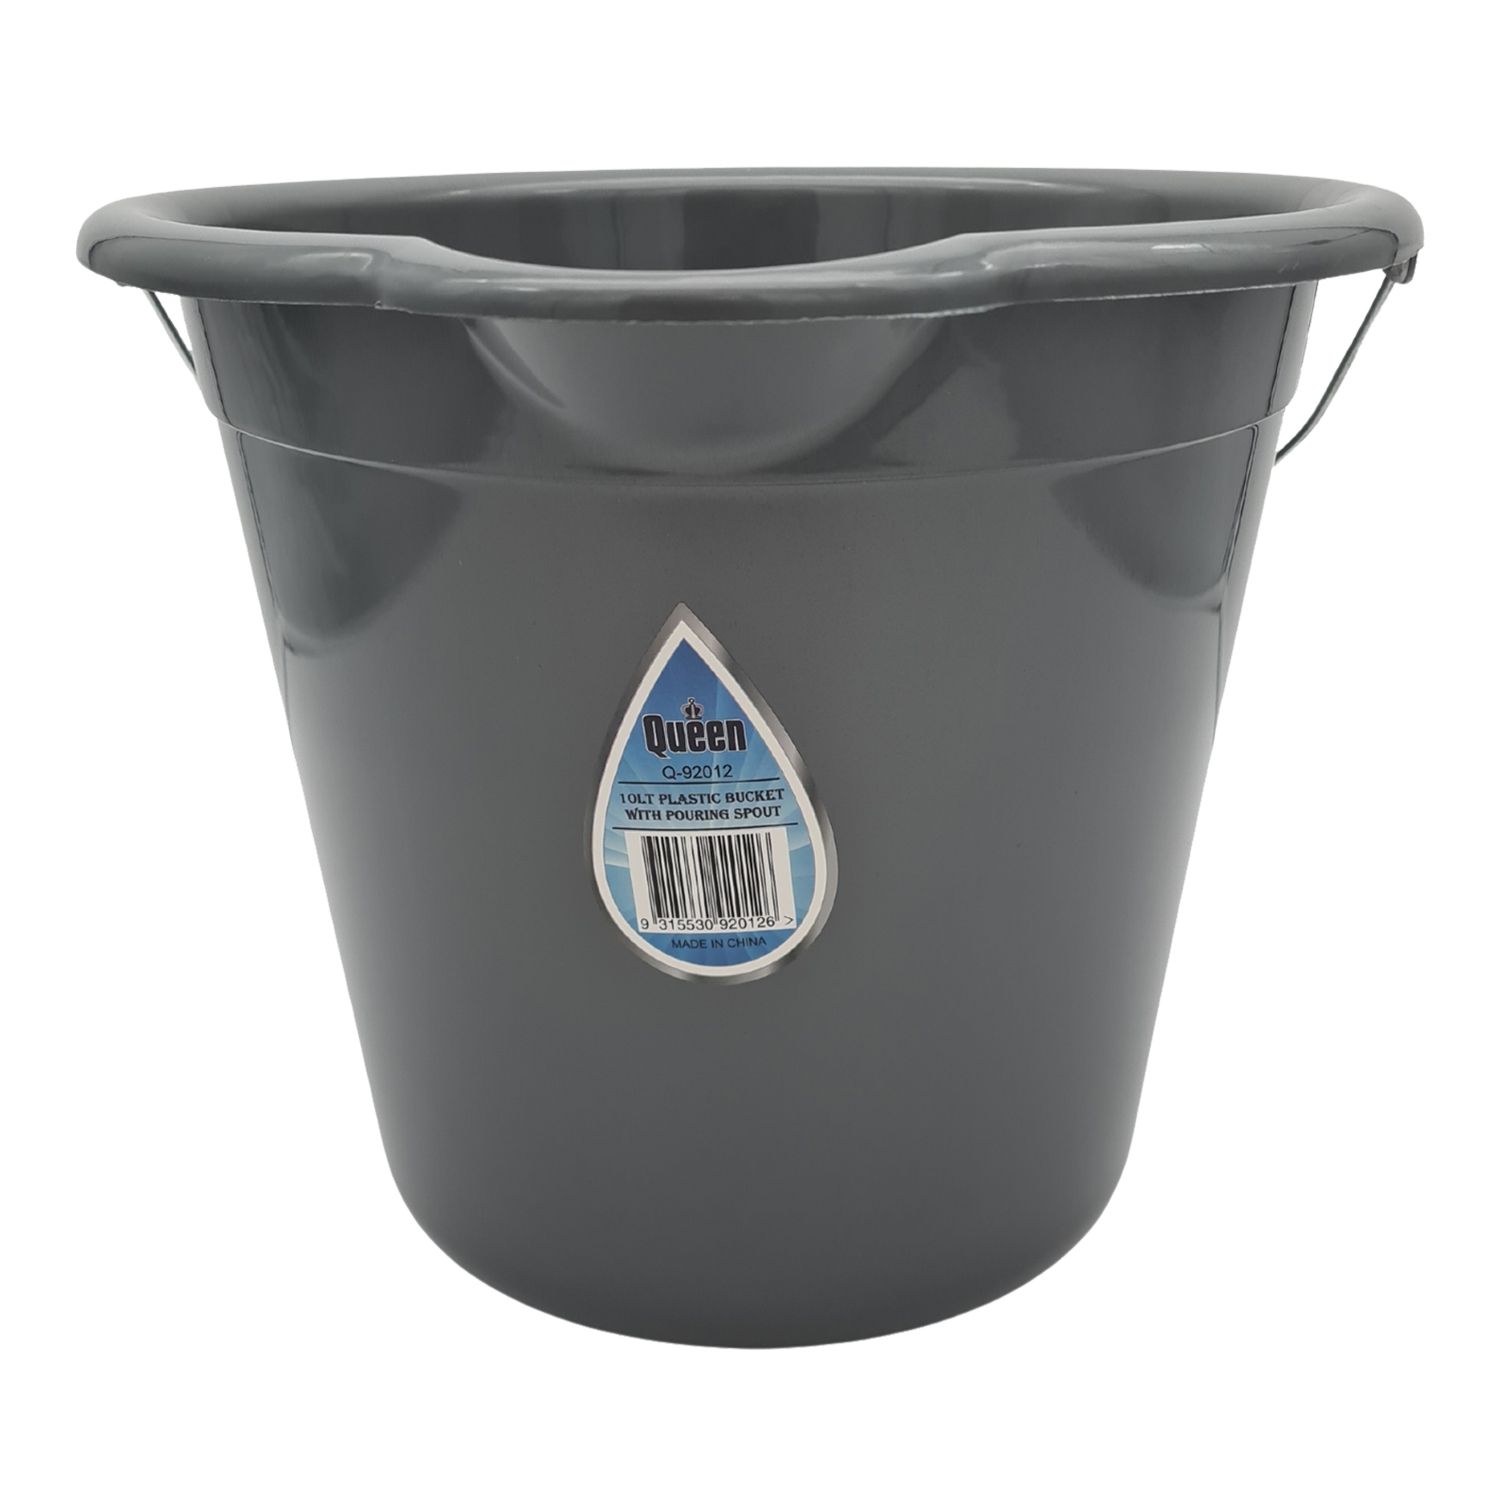 Buy Right Plastic Bucket with Spout Black 10L